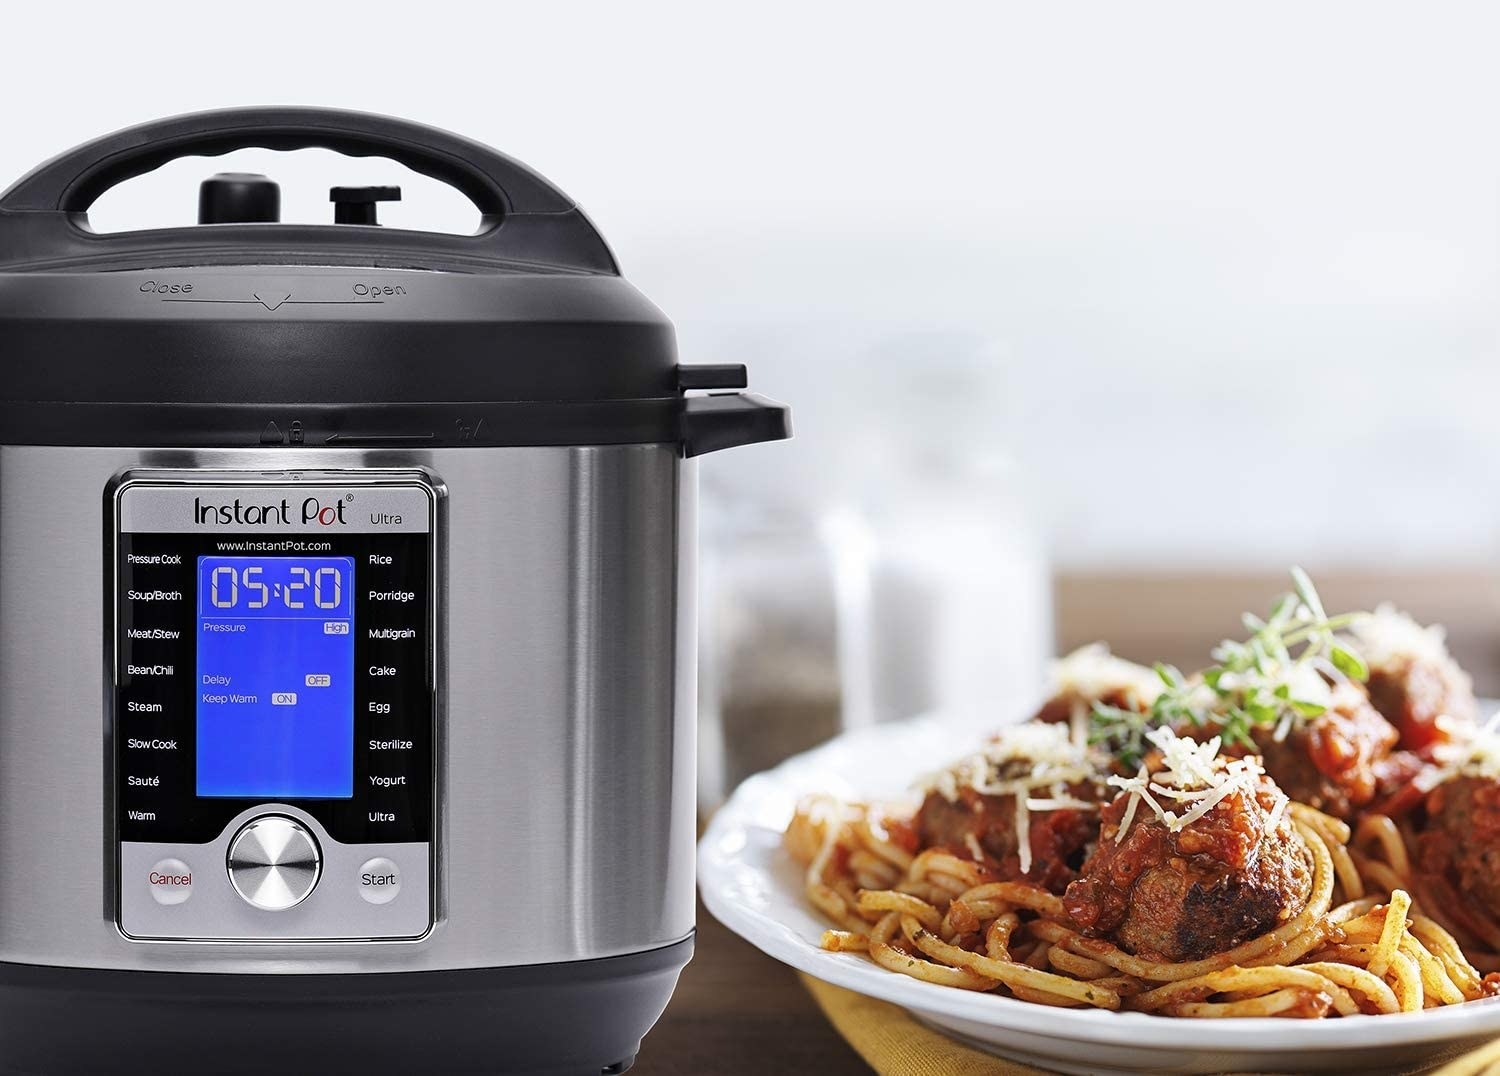 The Instant pot next to a bowl of spaghetti